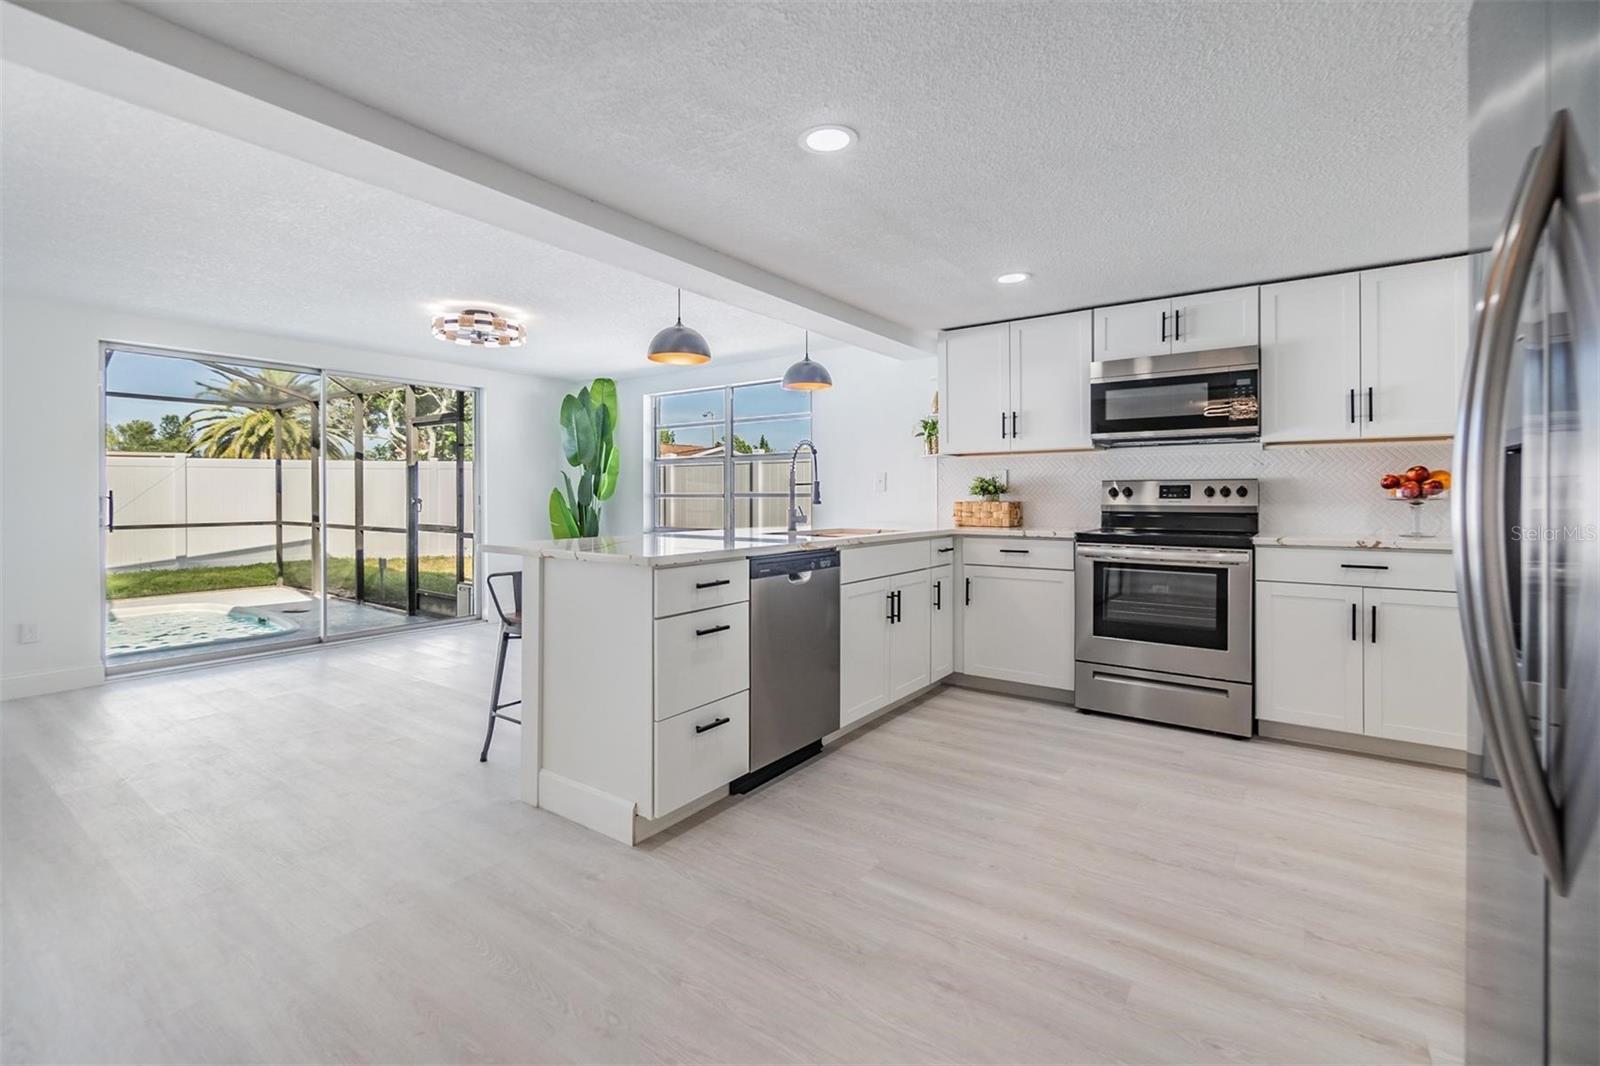 All new renovated kitchen. Luxury vinyl plank flooring, commercial faucet, gourmet sink, quartz countertops, shaker cabinets, stylish shelving, new hardware, can lights and pendulum lights above 10-feet bar.  Window and 2 sliders for entry to the patio/pool area